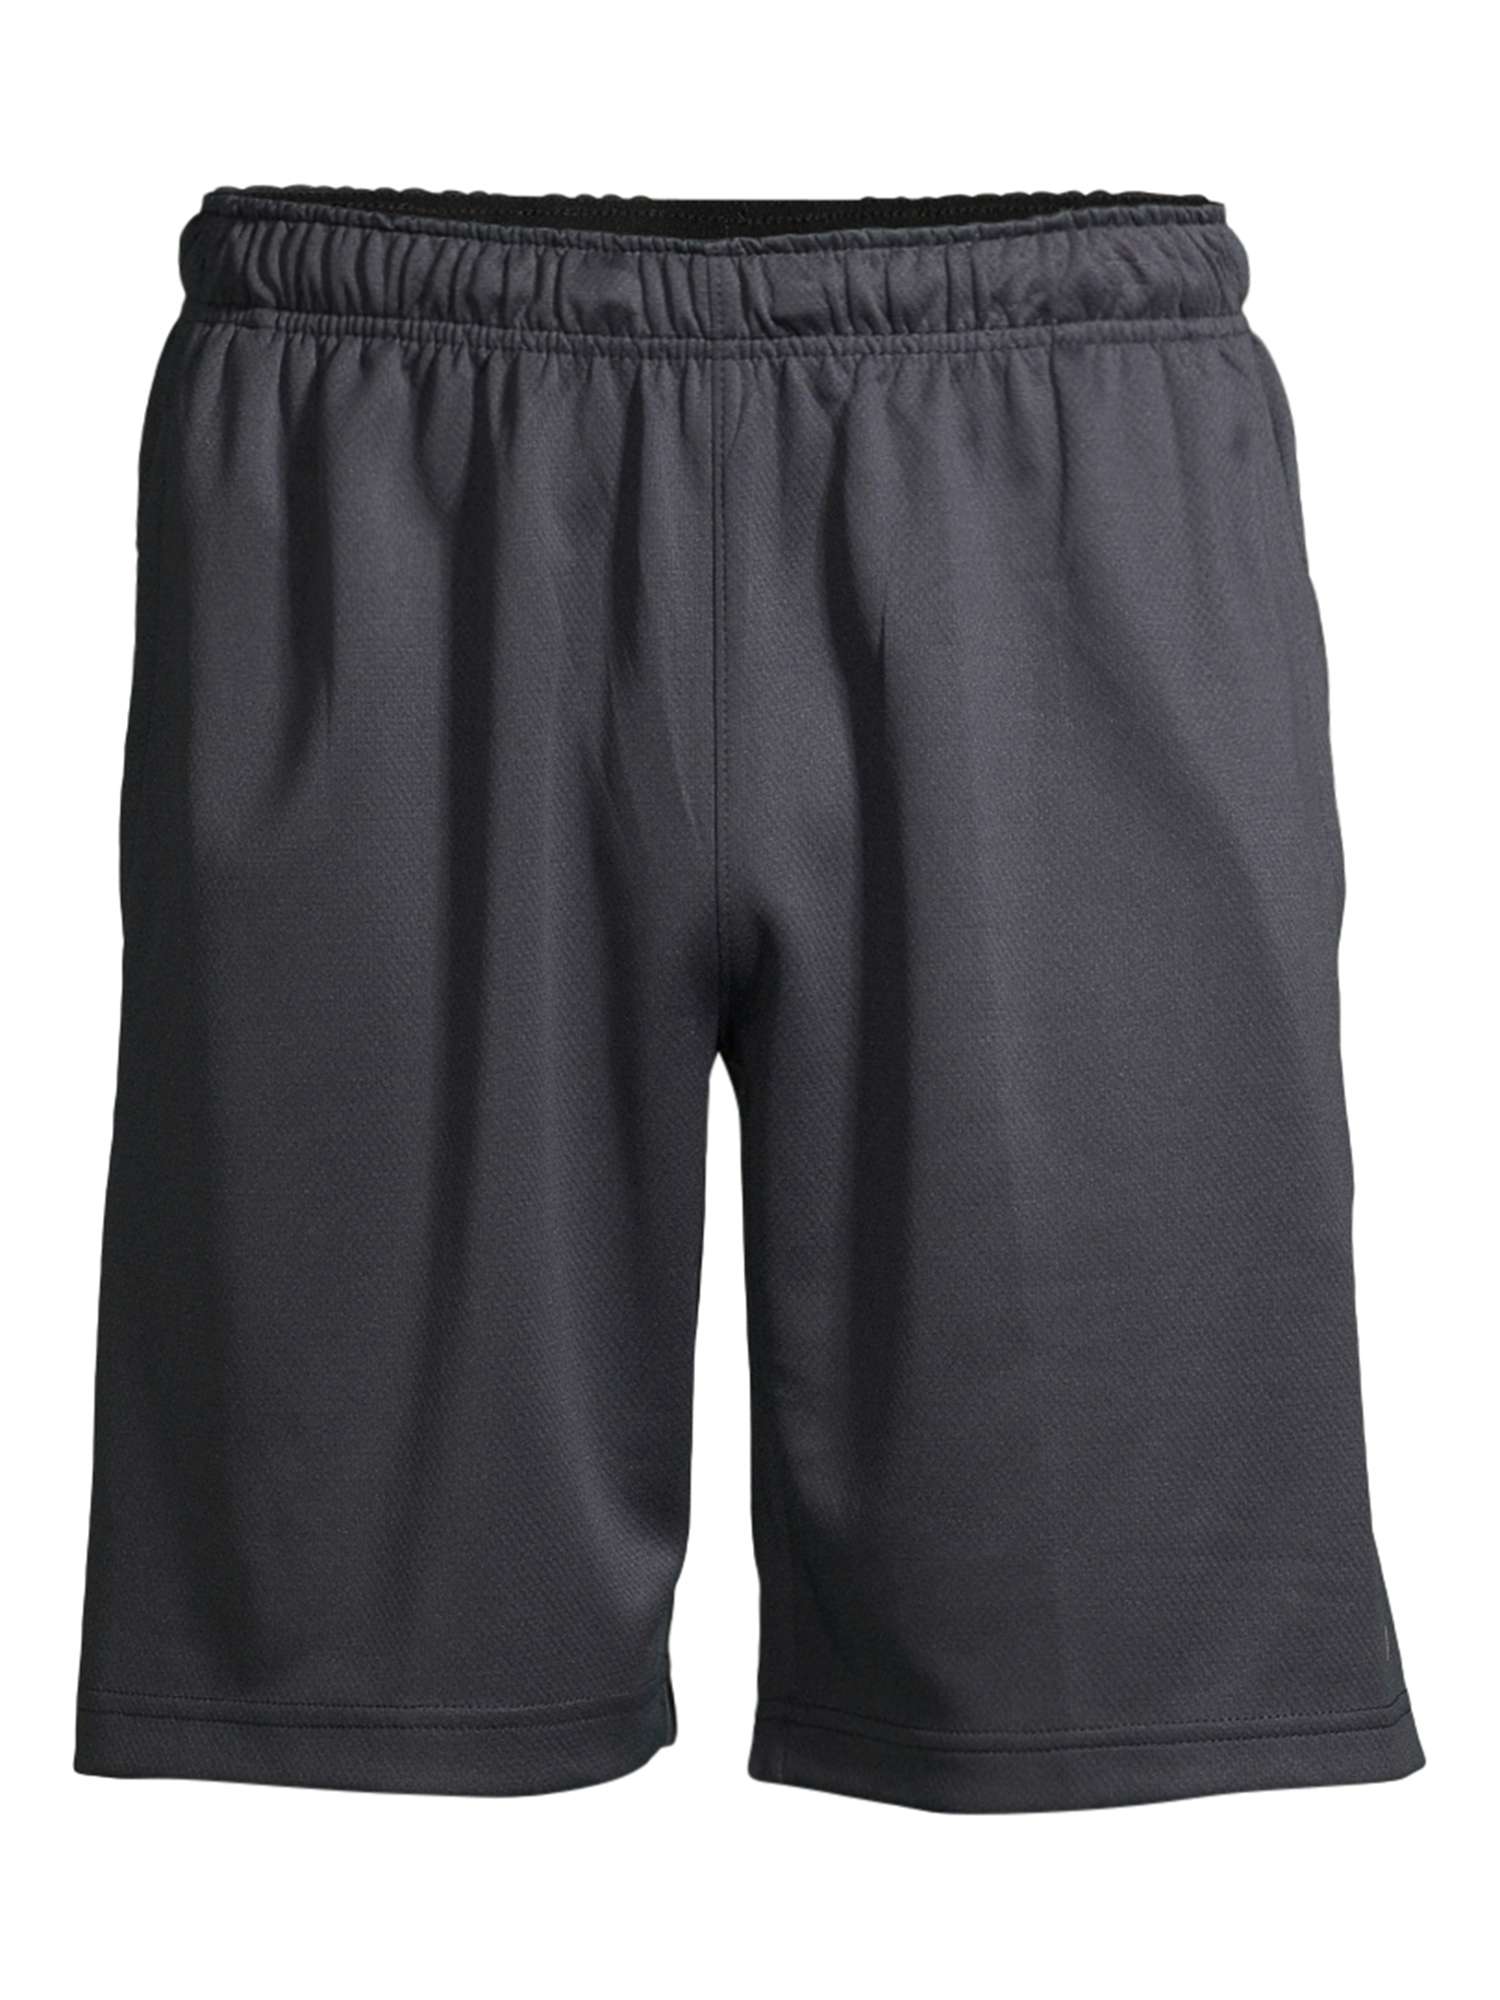 Russell Men's and Big Men's 9" Core Training Active Shorts, up to Size 5xl - image 4 of 6